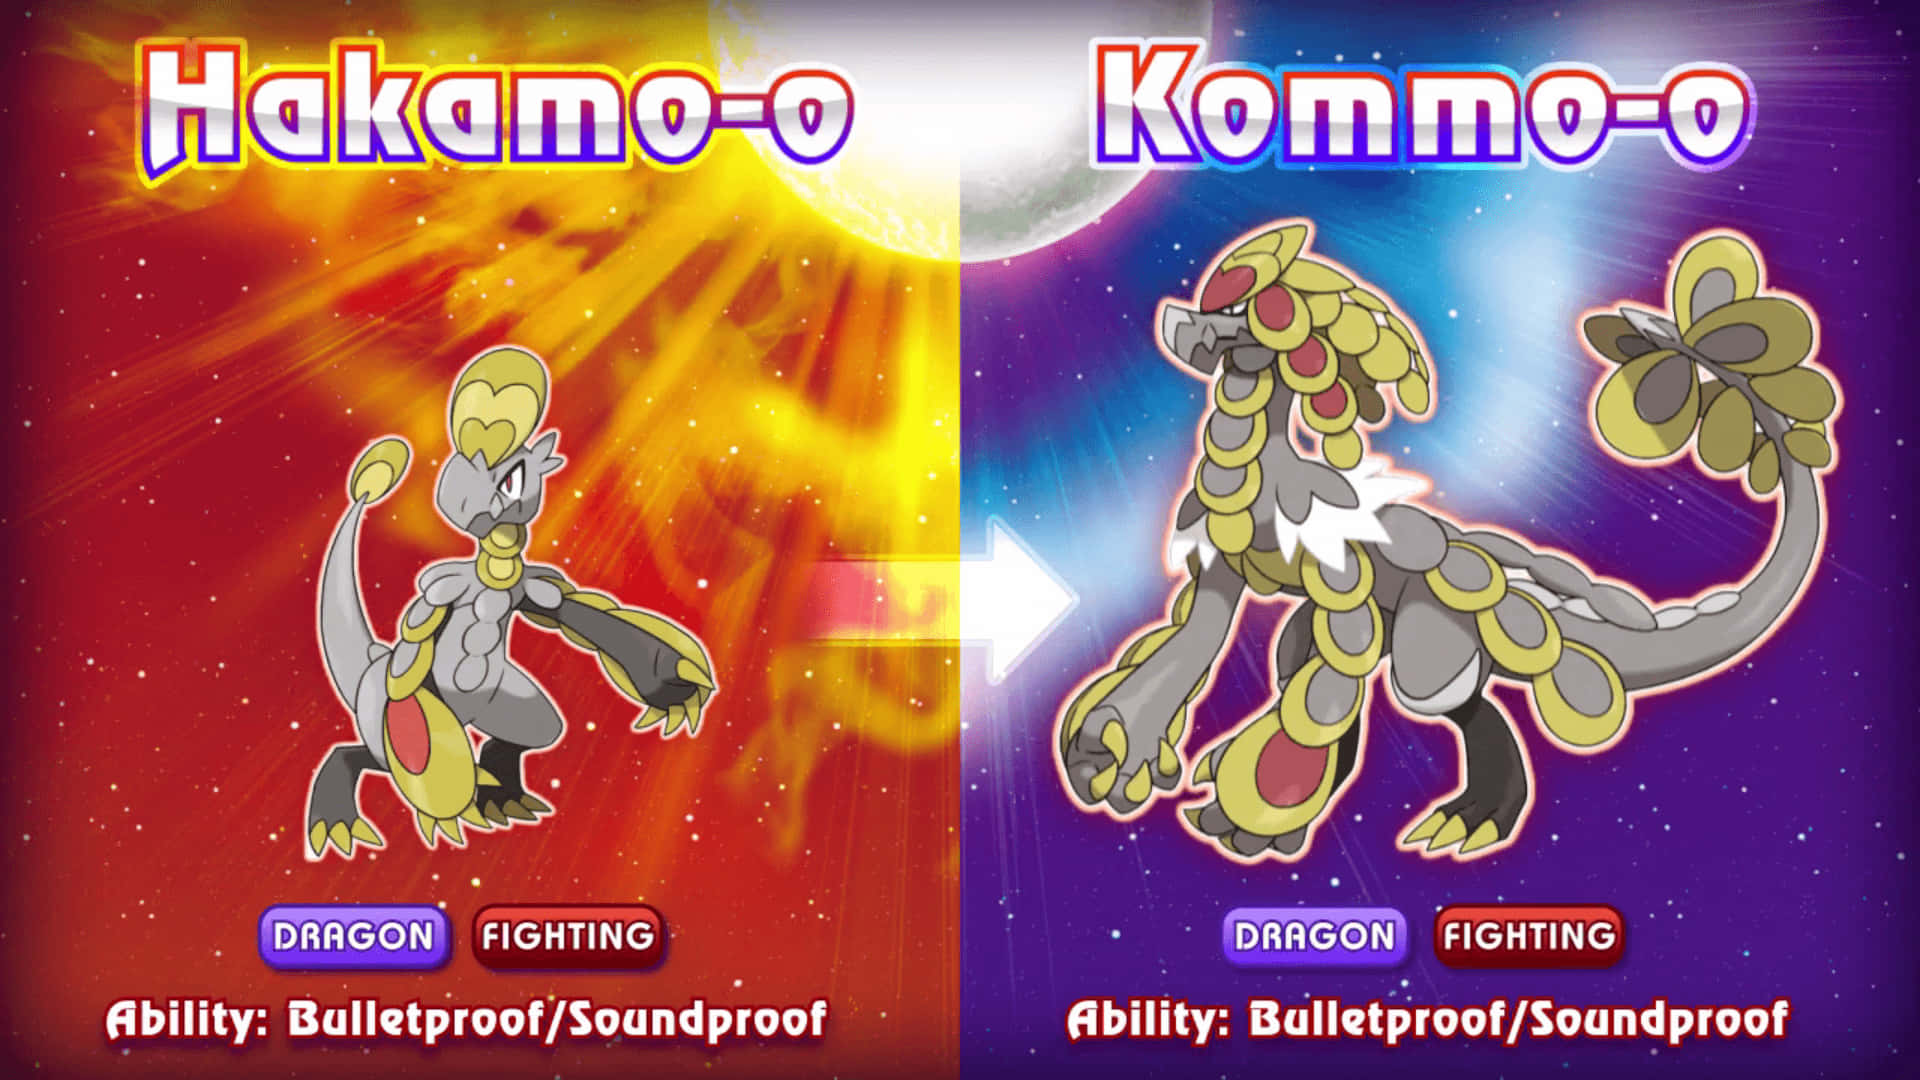 The Experience of Power with Hakamo-o and Kommo-o Wallpaper